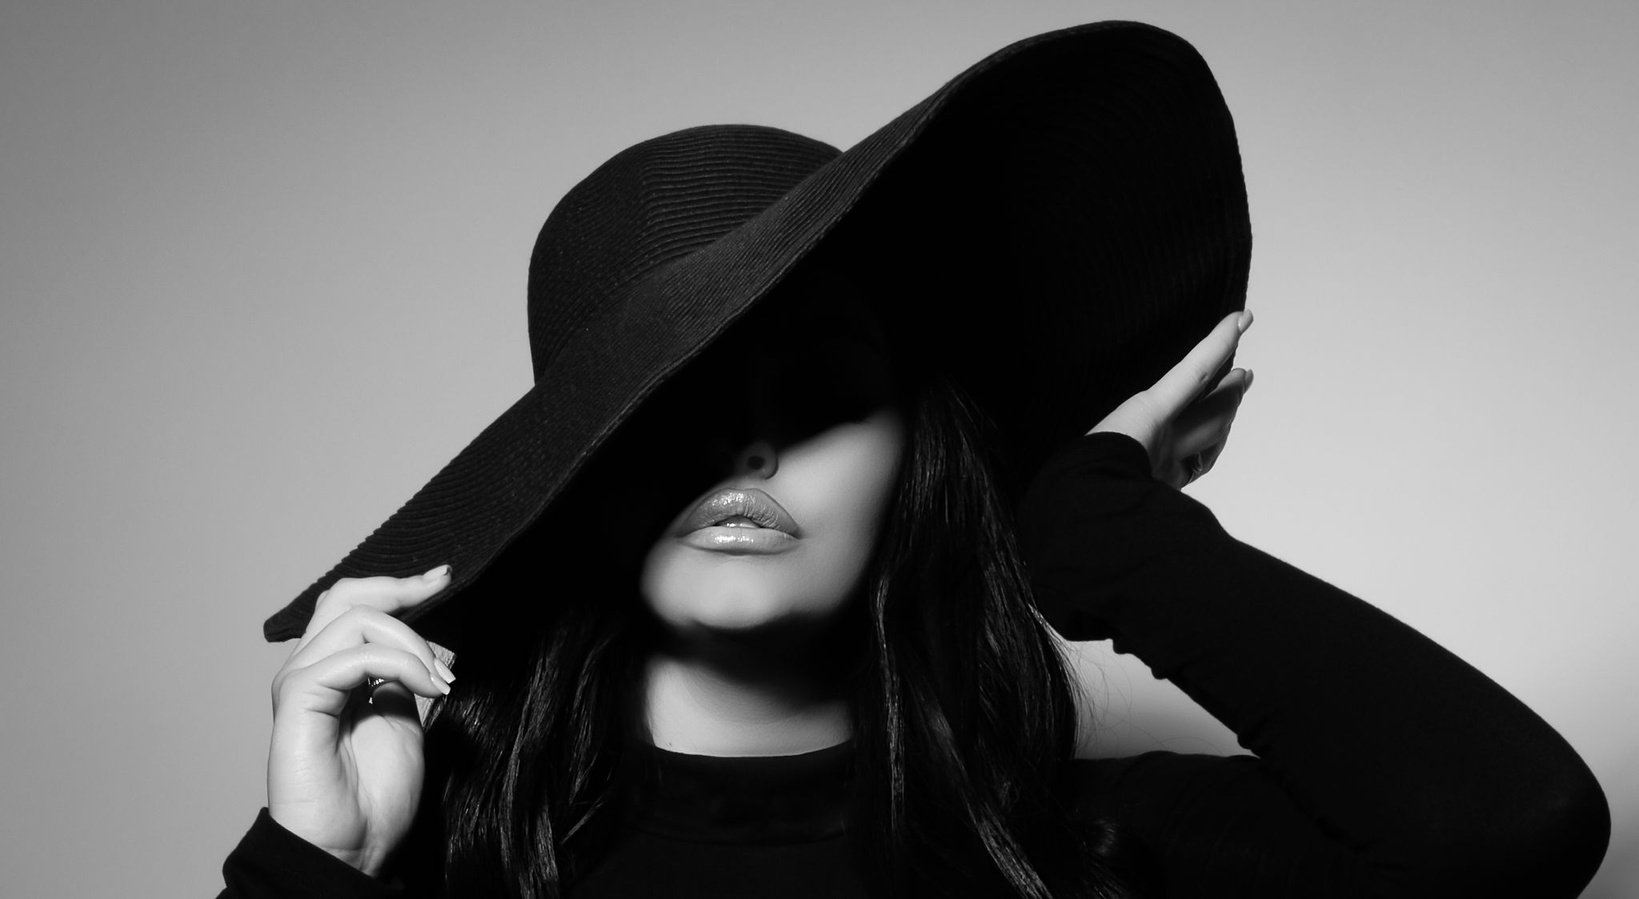 the is the perfect artist shot of a girl with the most perfect lips posed with a hat covering one eye in a dramatic lighting pose looking very elegant taken in Modestos most exclusive photography studio by the best photographer in California 